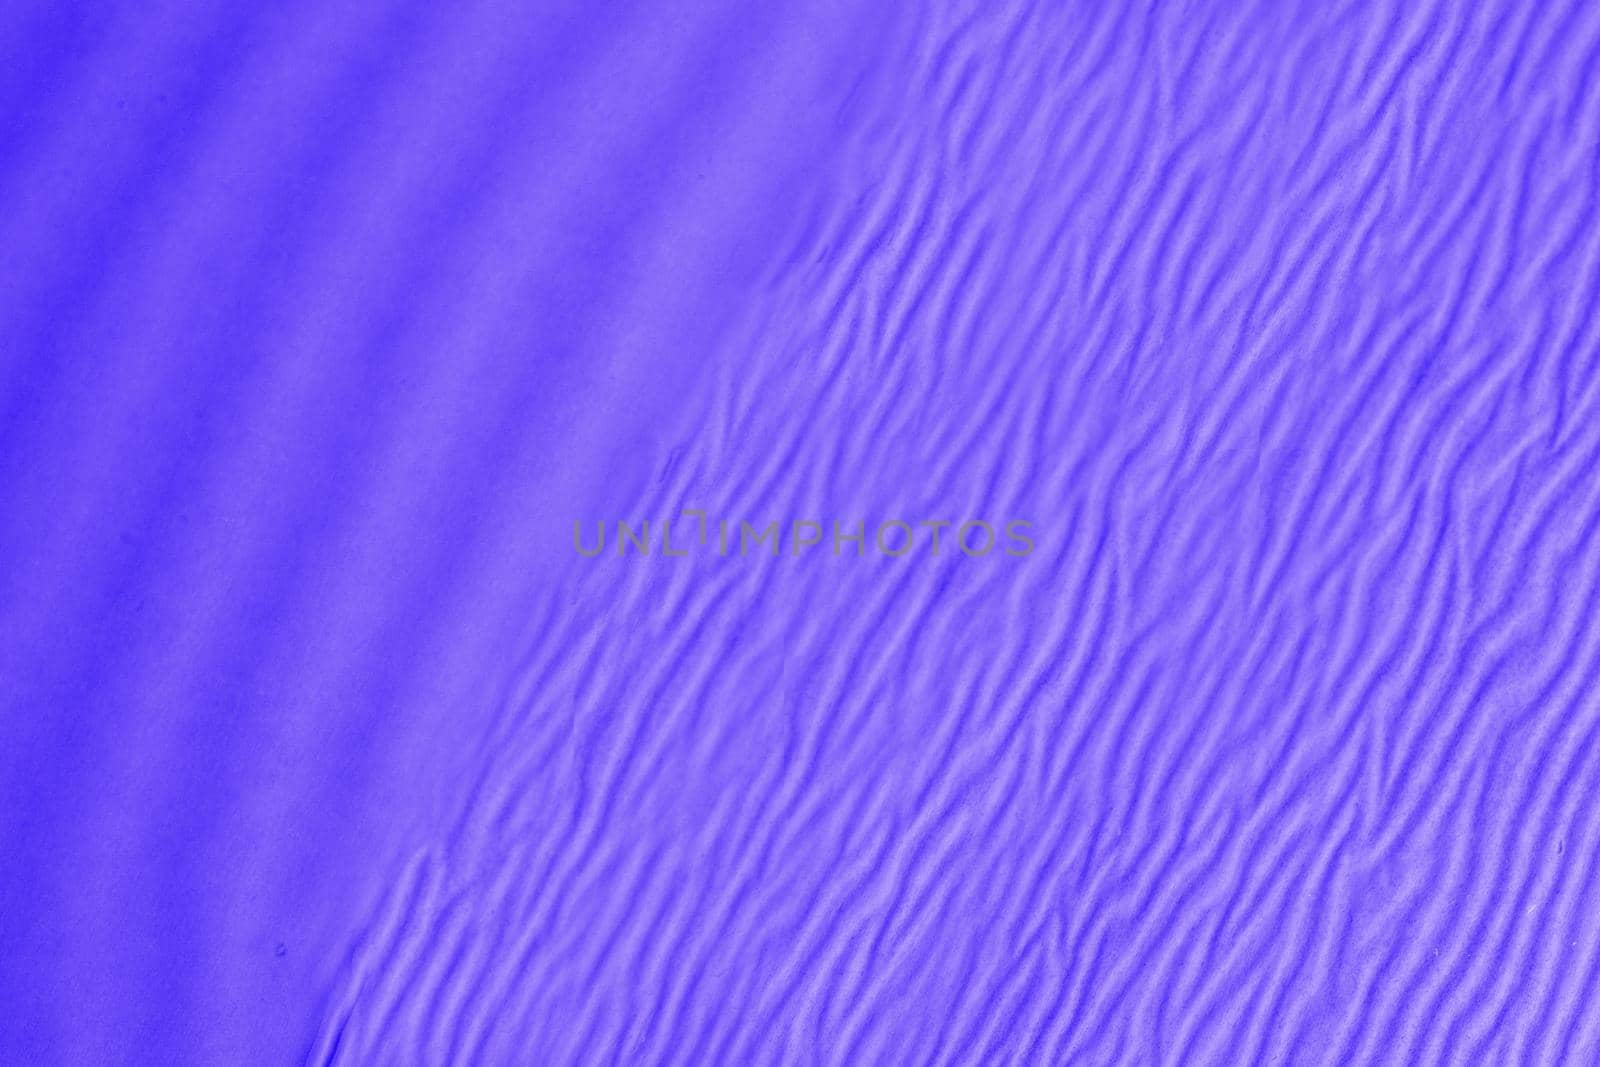 Beautiful purple decorative abstract background with ripples and waves. Copy space